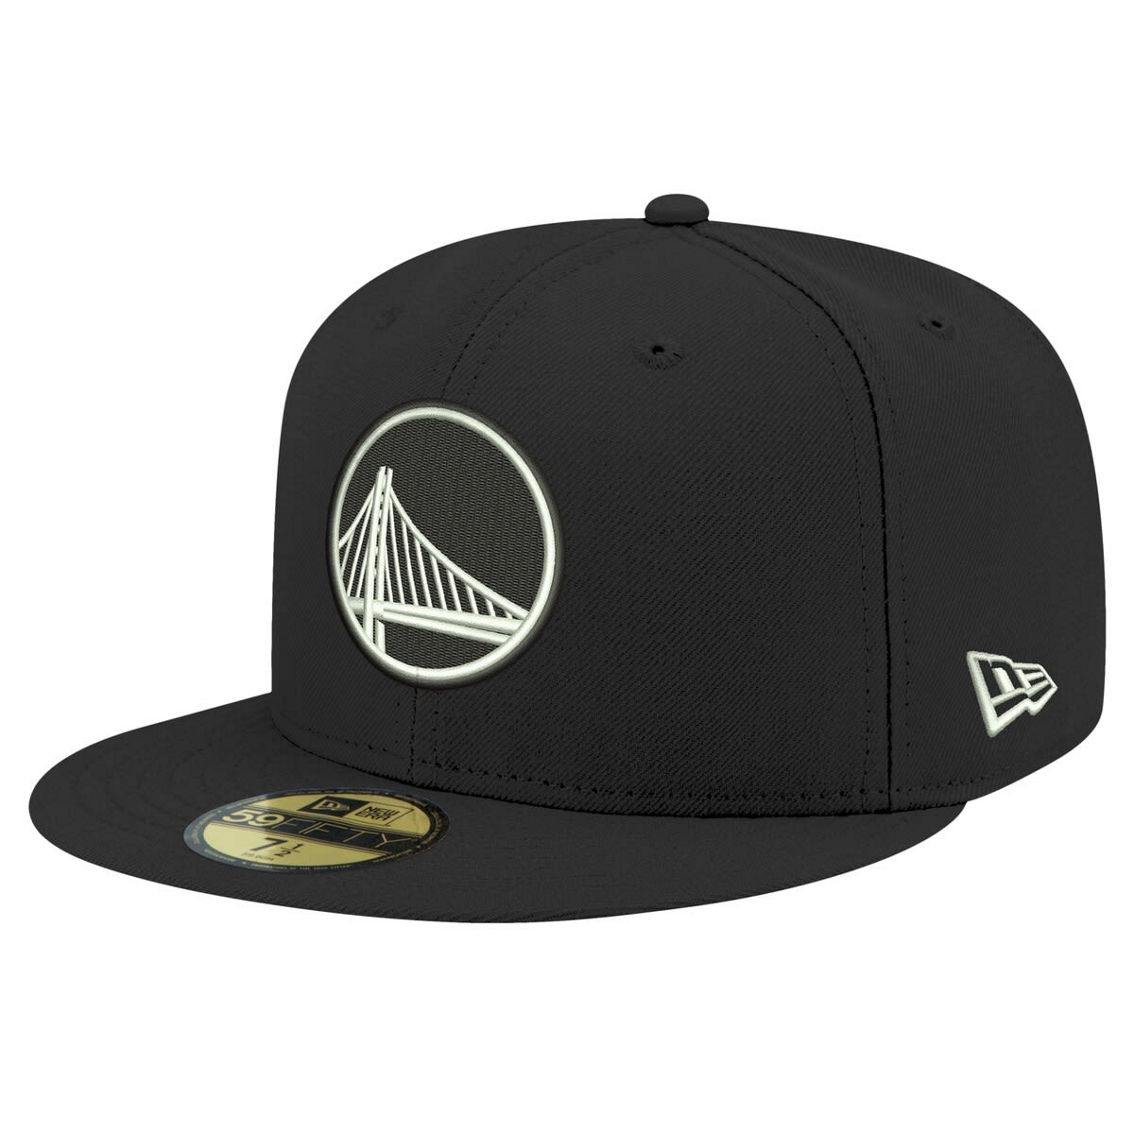 New Era Men's Black Golden State Warriors Black & White 59FIFTY Fitted Hat - Image 2 of 4